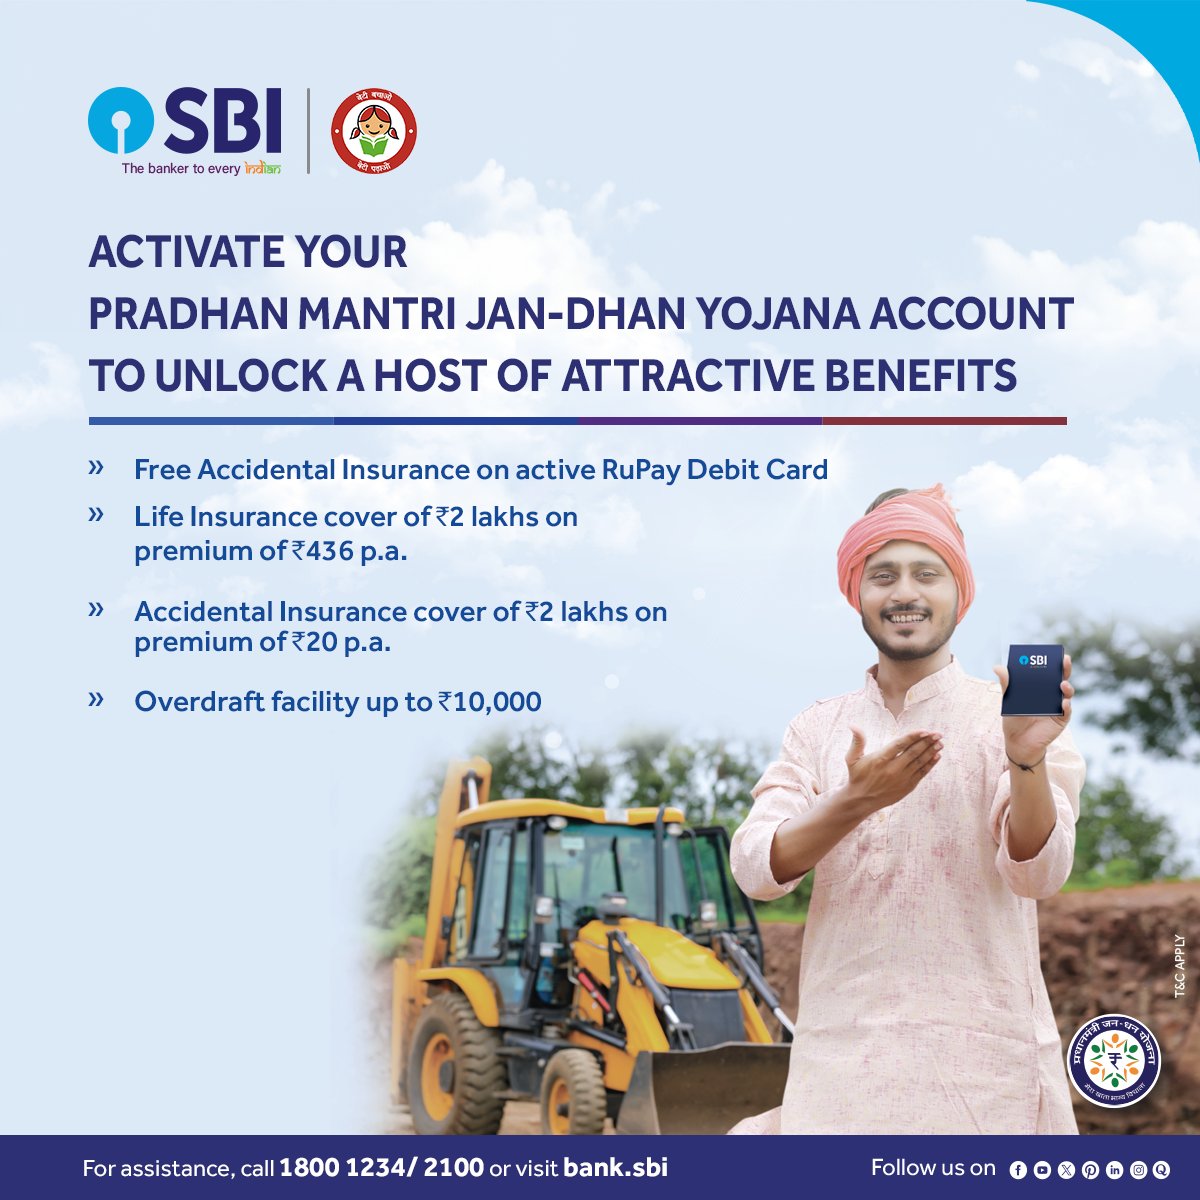 Attract benefits, sway worries! The Pradhan Mantri Jan-Dhan Yojana account is a host of numerous benefits. Activate yours now and avail – - Free accidental Insurance on your active RuPay Debit Card - Life cover of ₹2 Lakhs - Accidental cover of ₹2 Lakhs - Overdraft